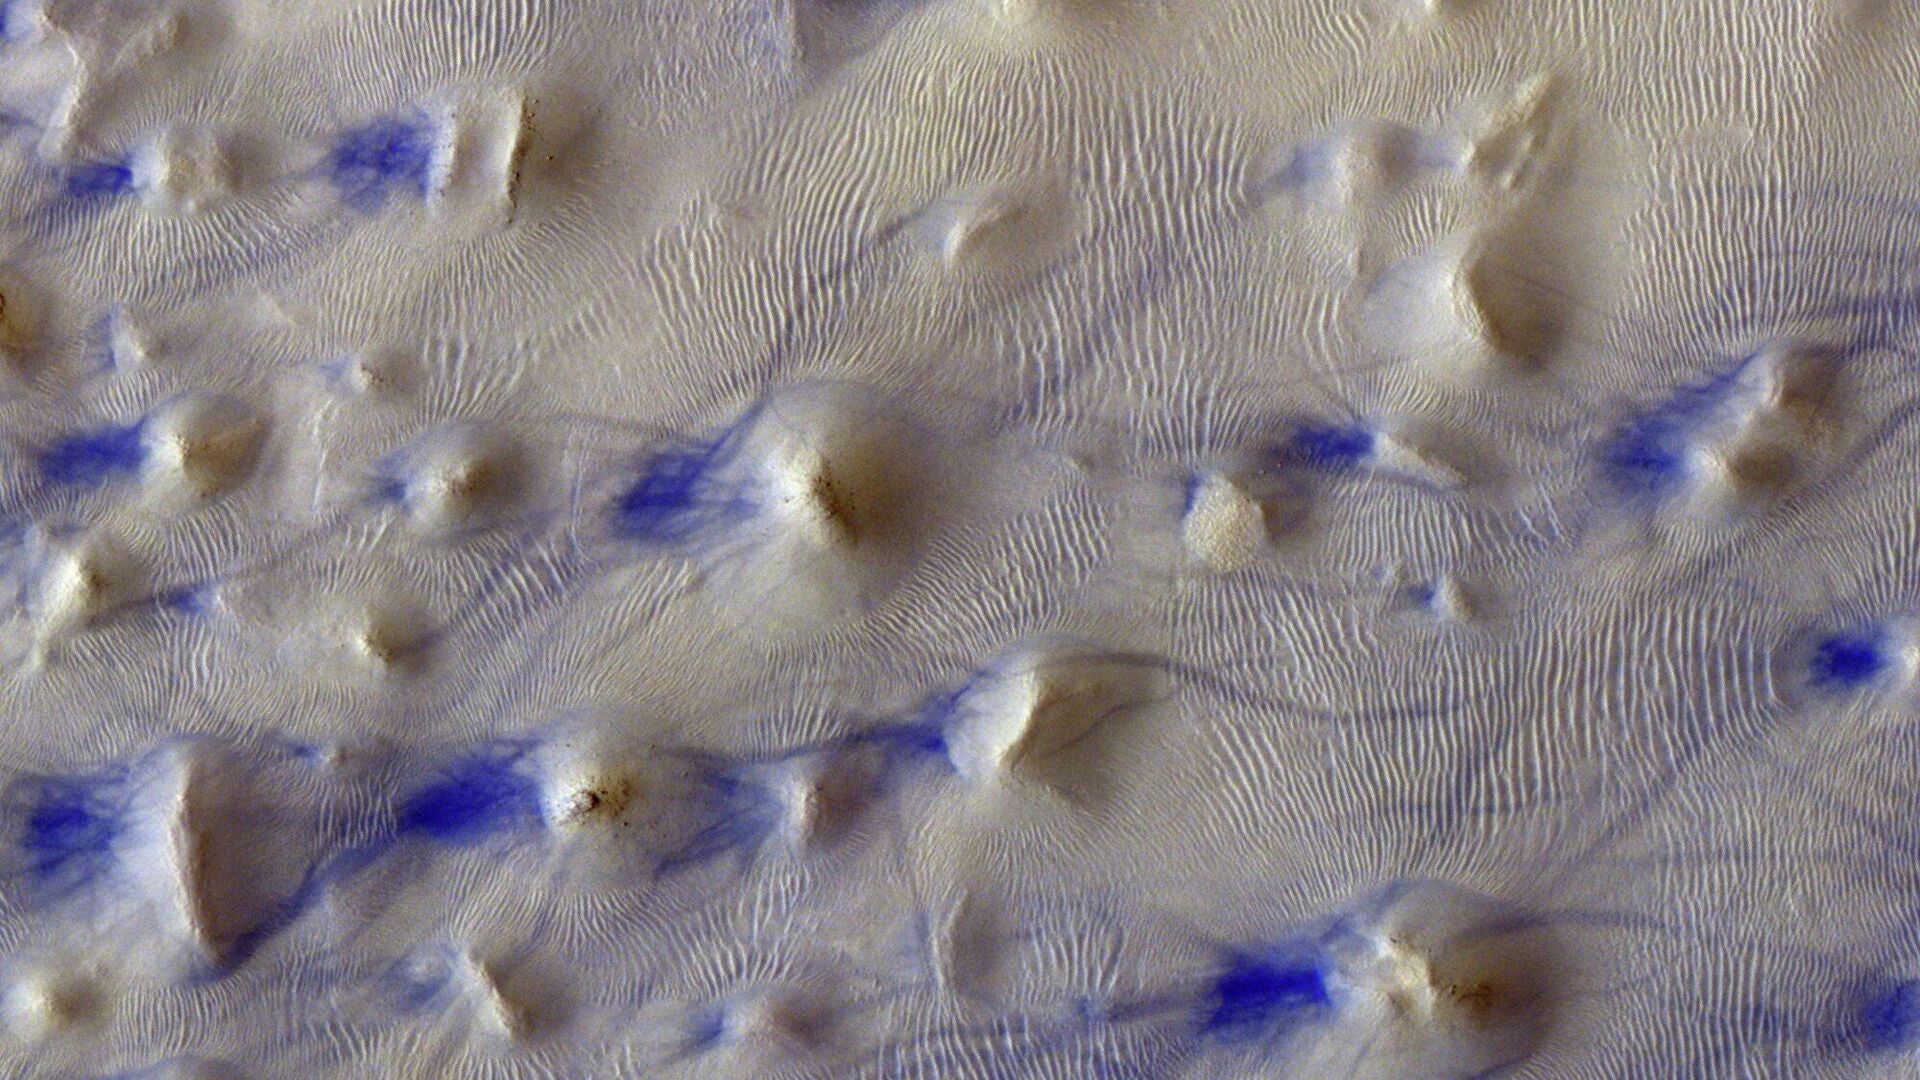 This image of mounds, wind-sculpted ripples and dustdevil tracks near Hooke Crater on Mars was taken by ESA Roscosmoson 1 February  - اسپوتنیک افغانستان  , 1920, 13.02.2022